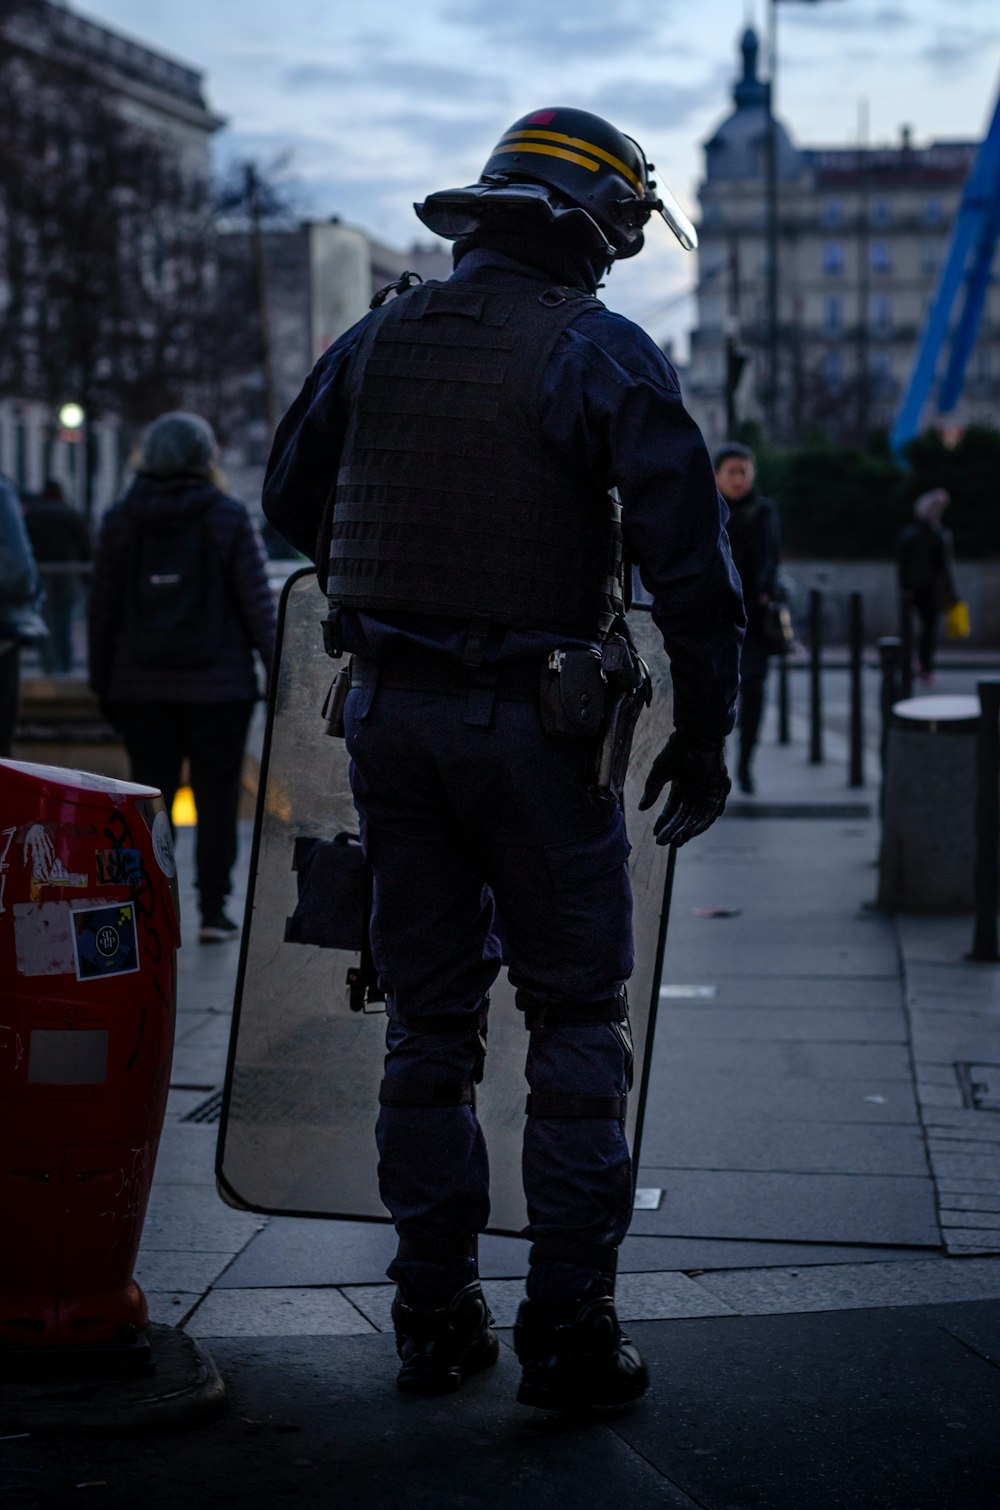 police officer standing and carrying riot shield